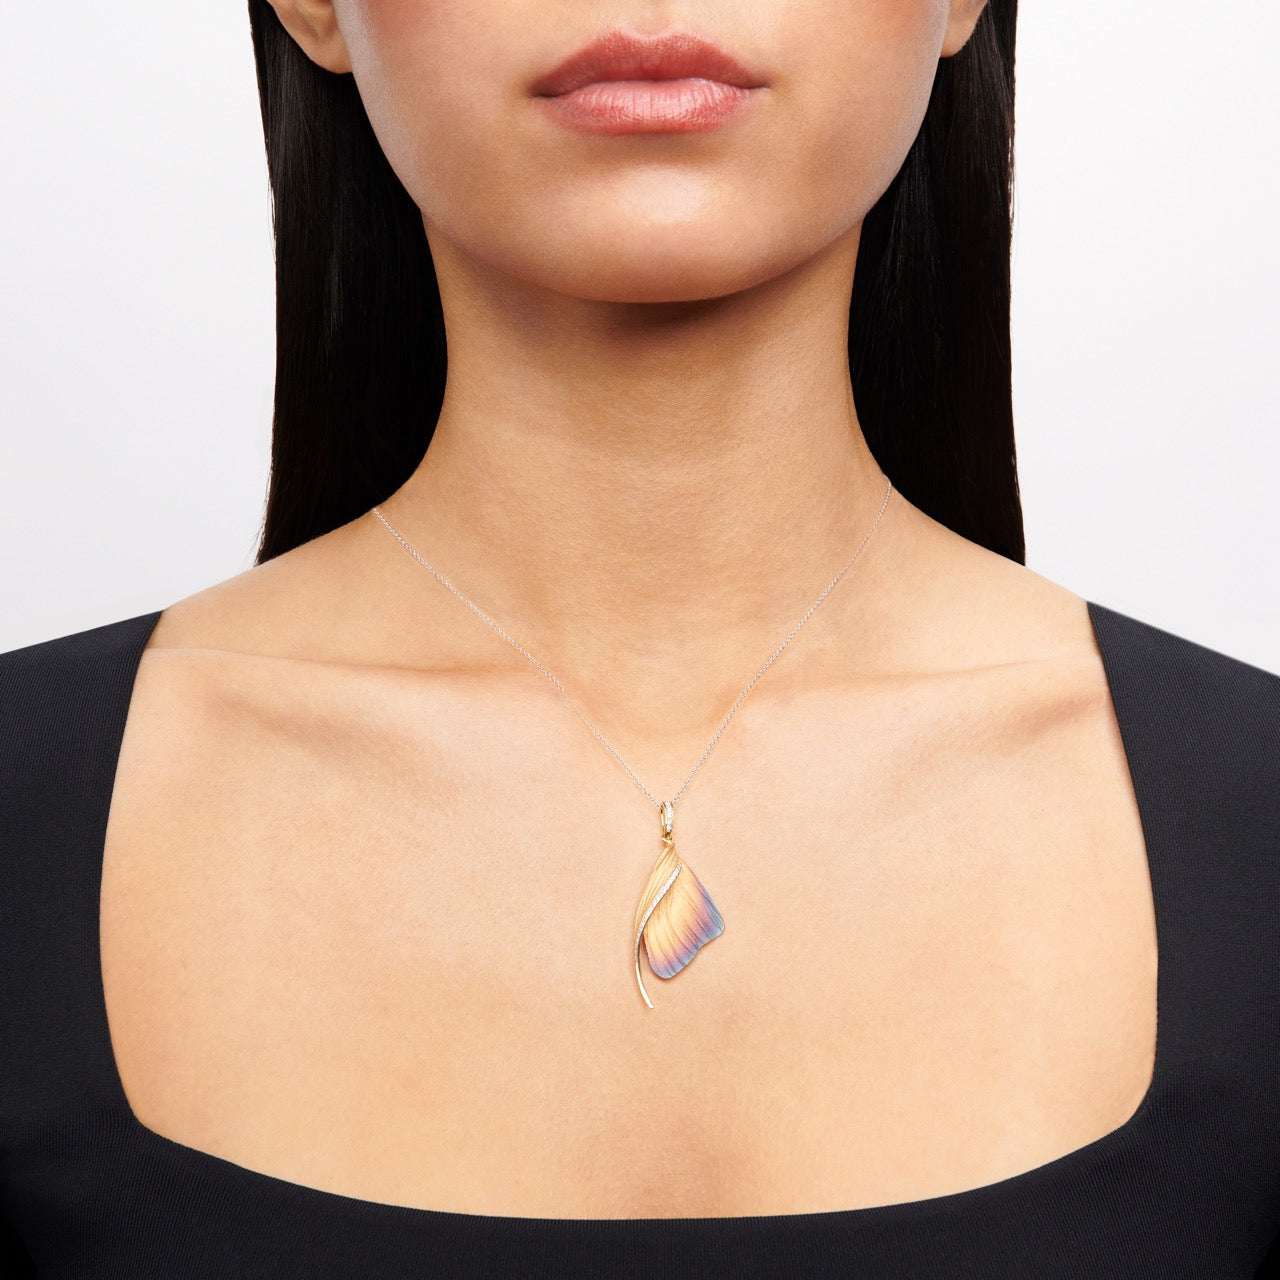 Fallen Leaves Pendant Necklace in 18k Gold with Diamonds DP171